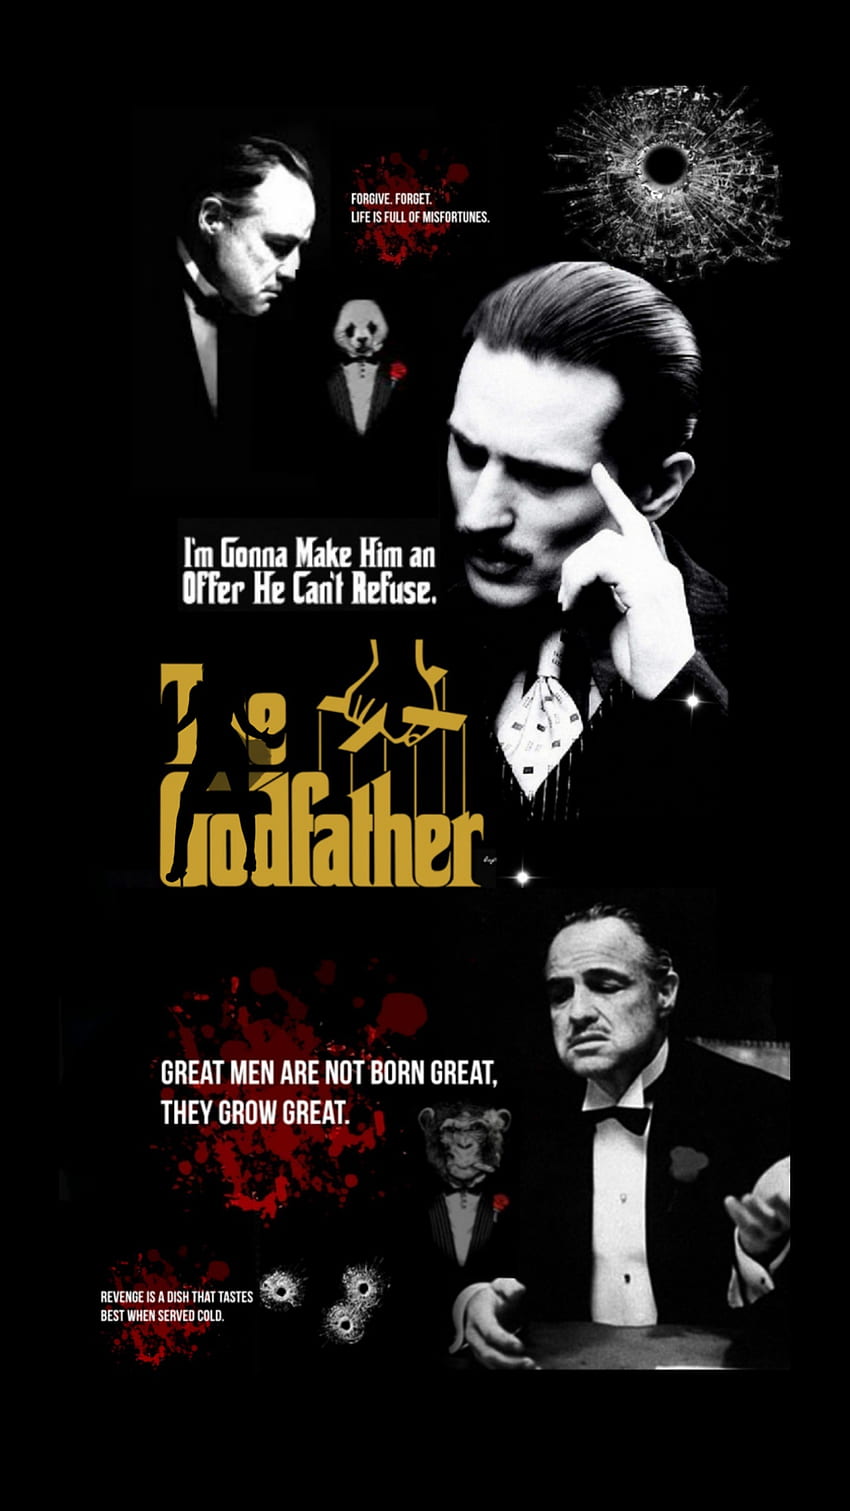 The Godfather Wallpapers (23+ images inside)